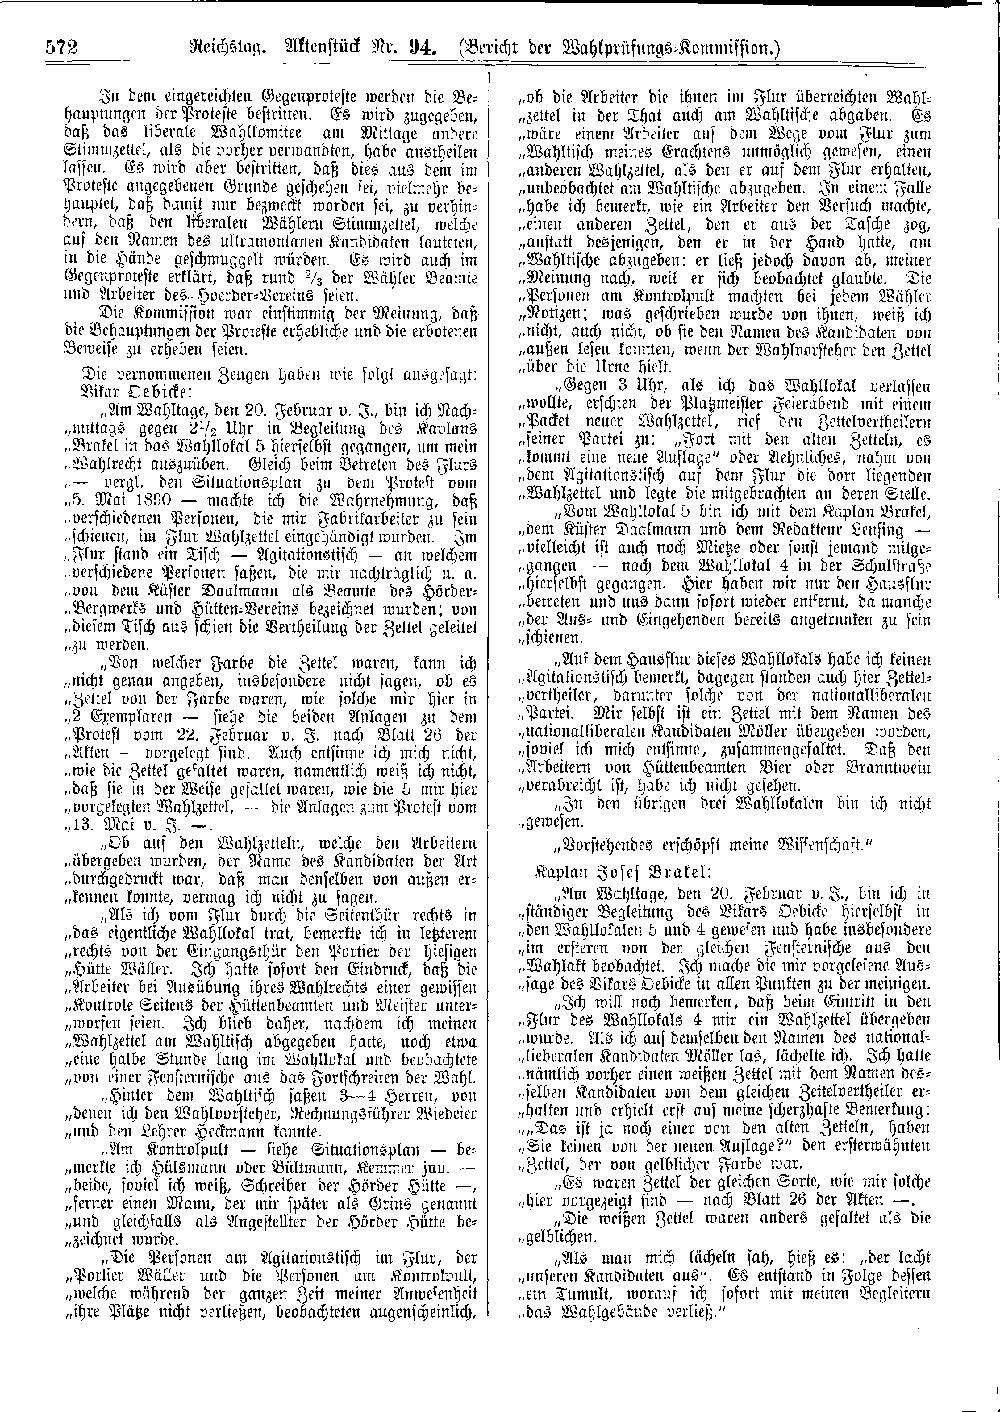 Scan of page 572